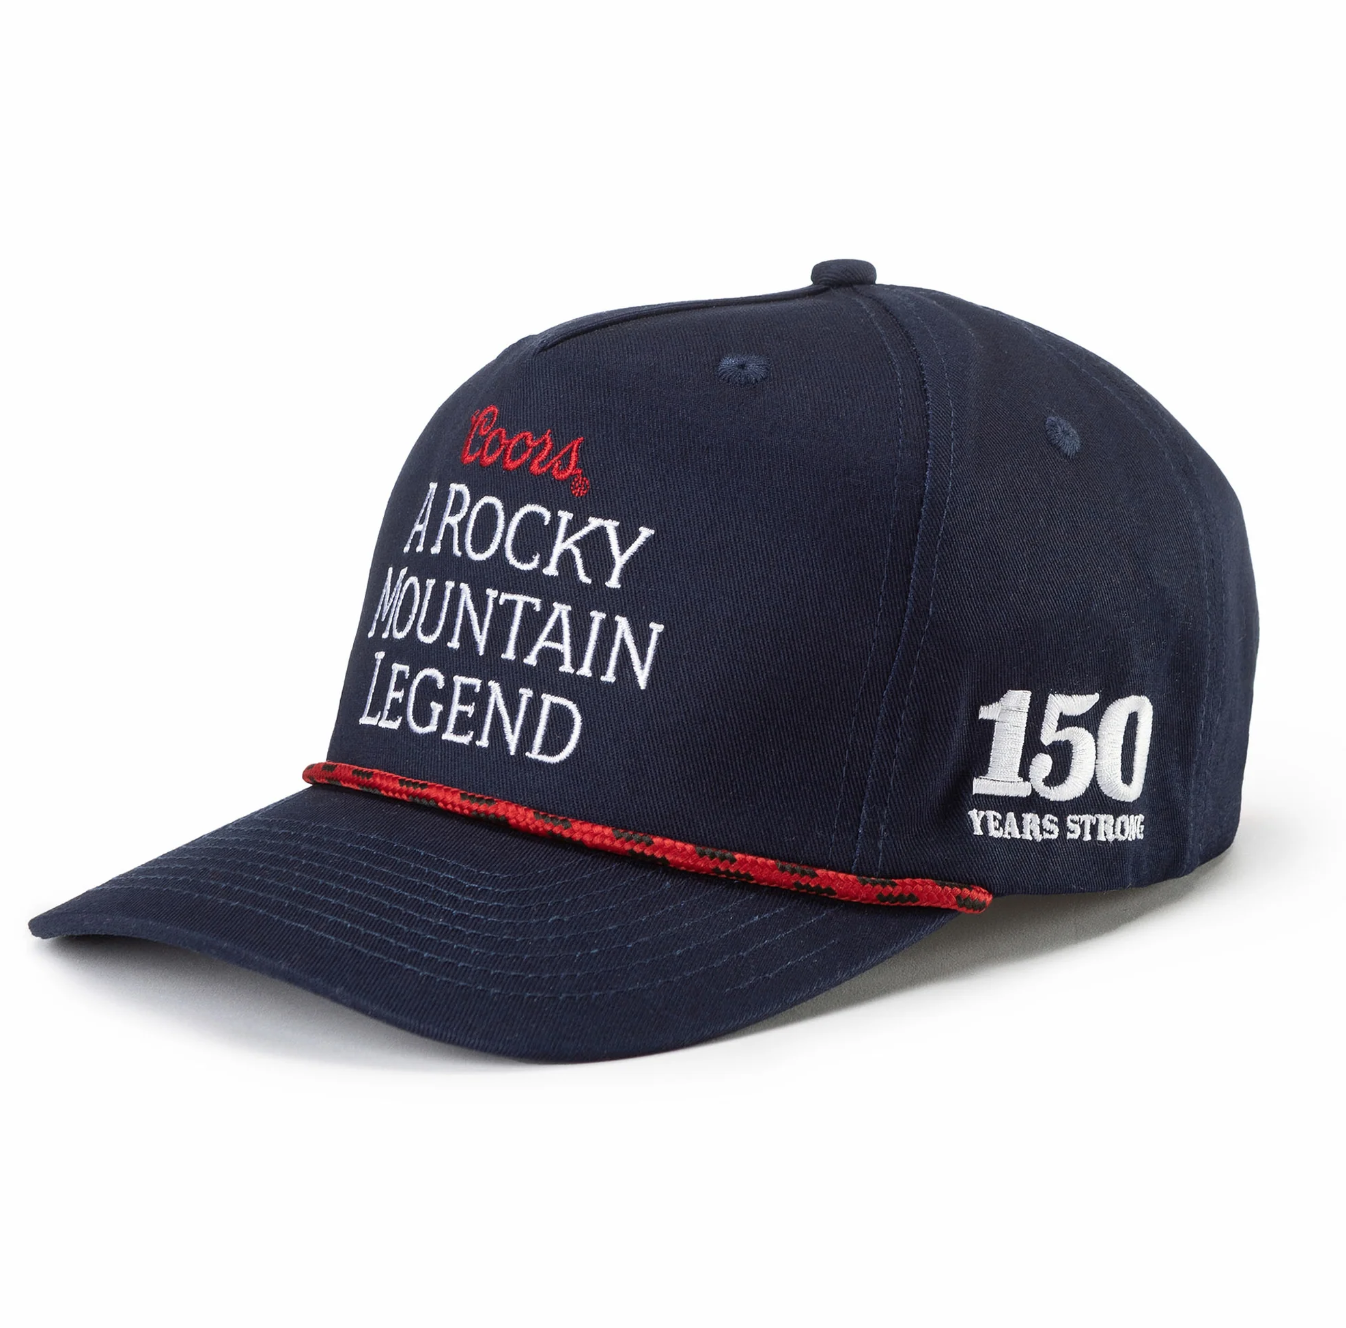 SEAGER X COORS BANQUET ROCKY MOUNTAIN LEGEND SNAPBACK - NAVY